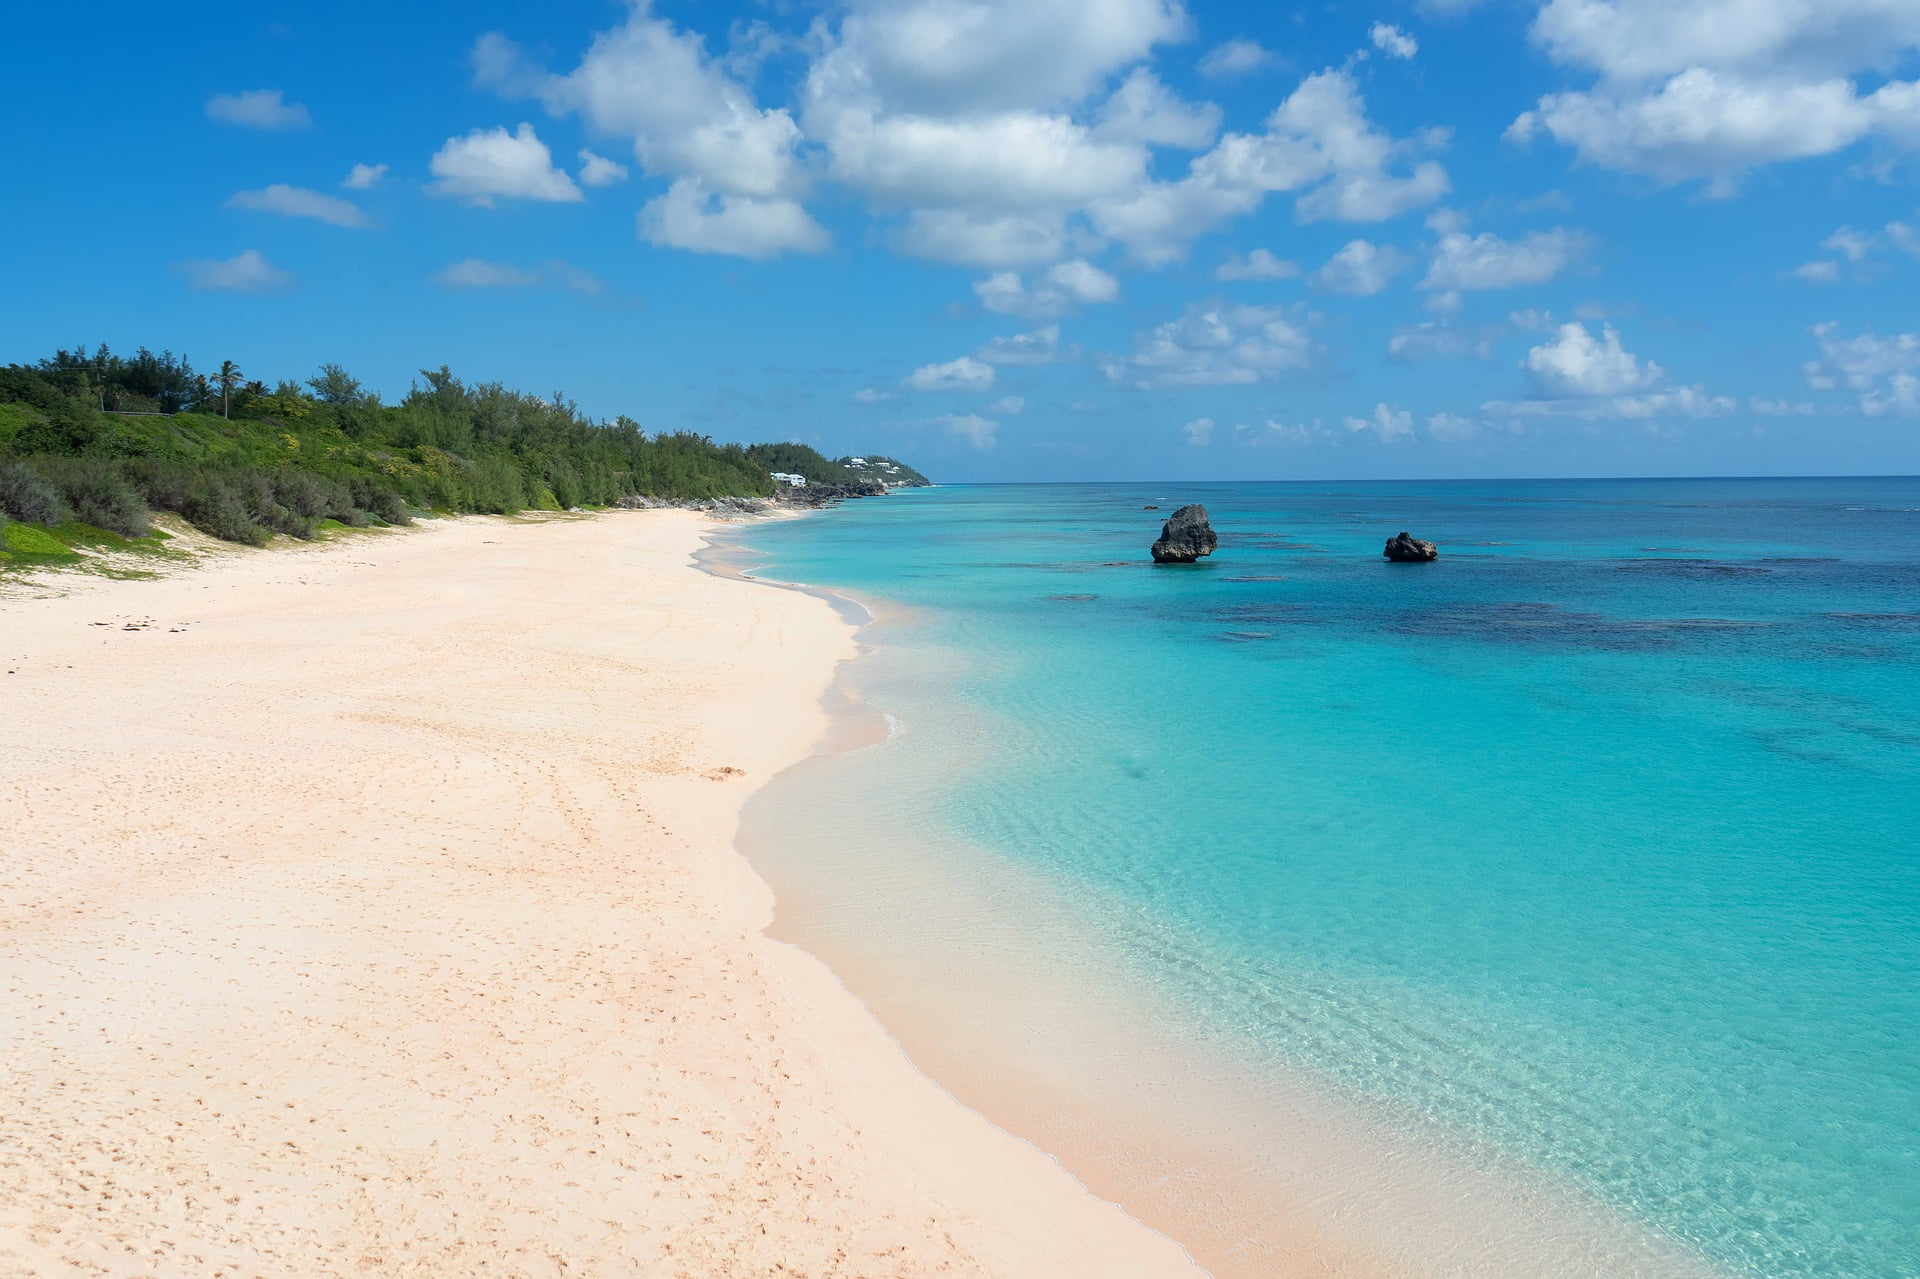 10 Amazing Facts About Bermuda